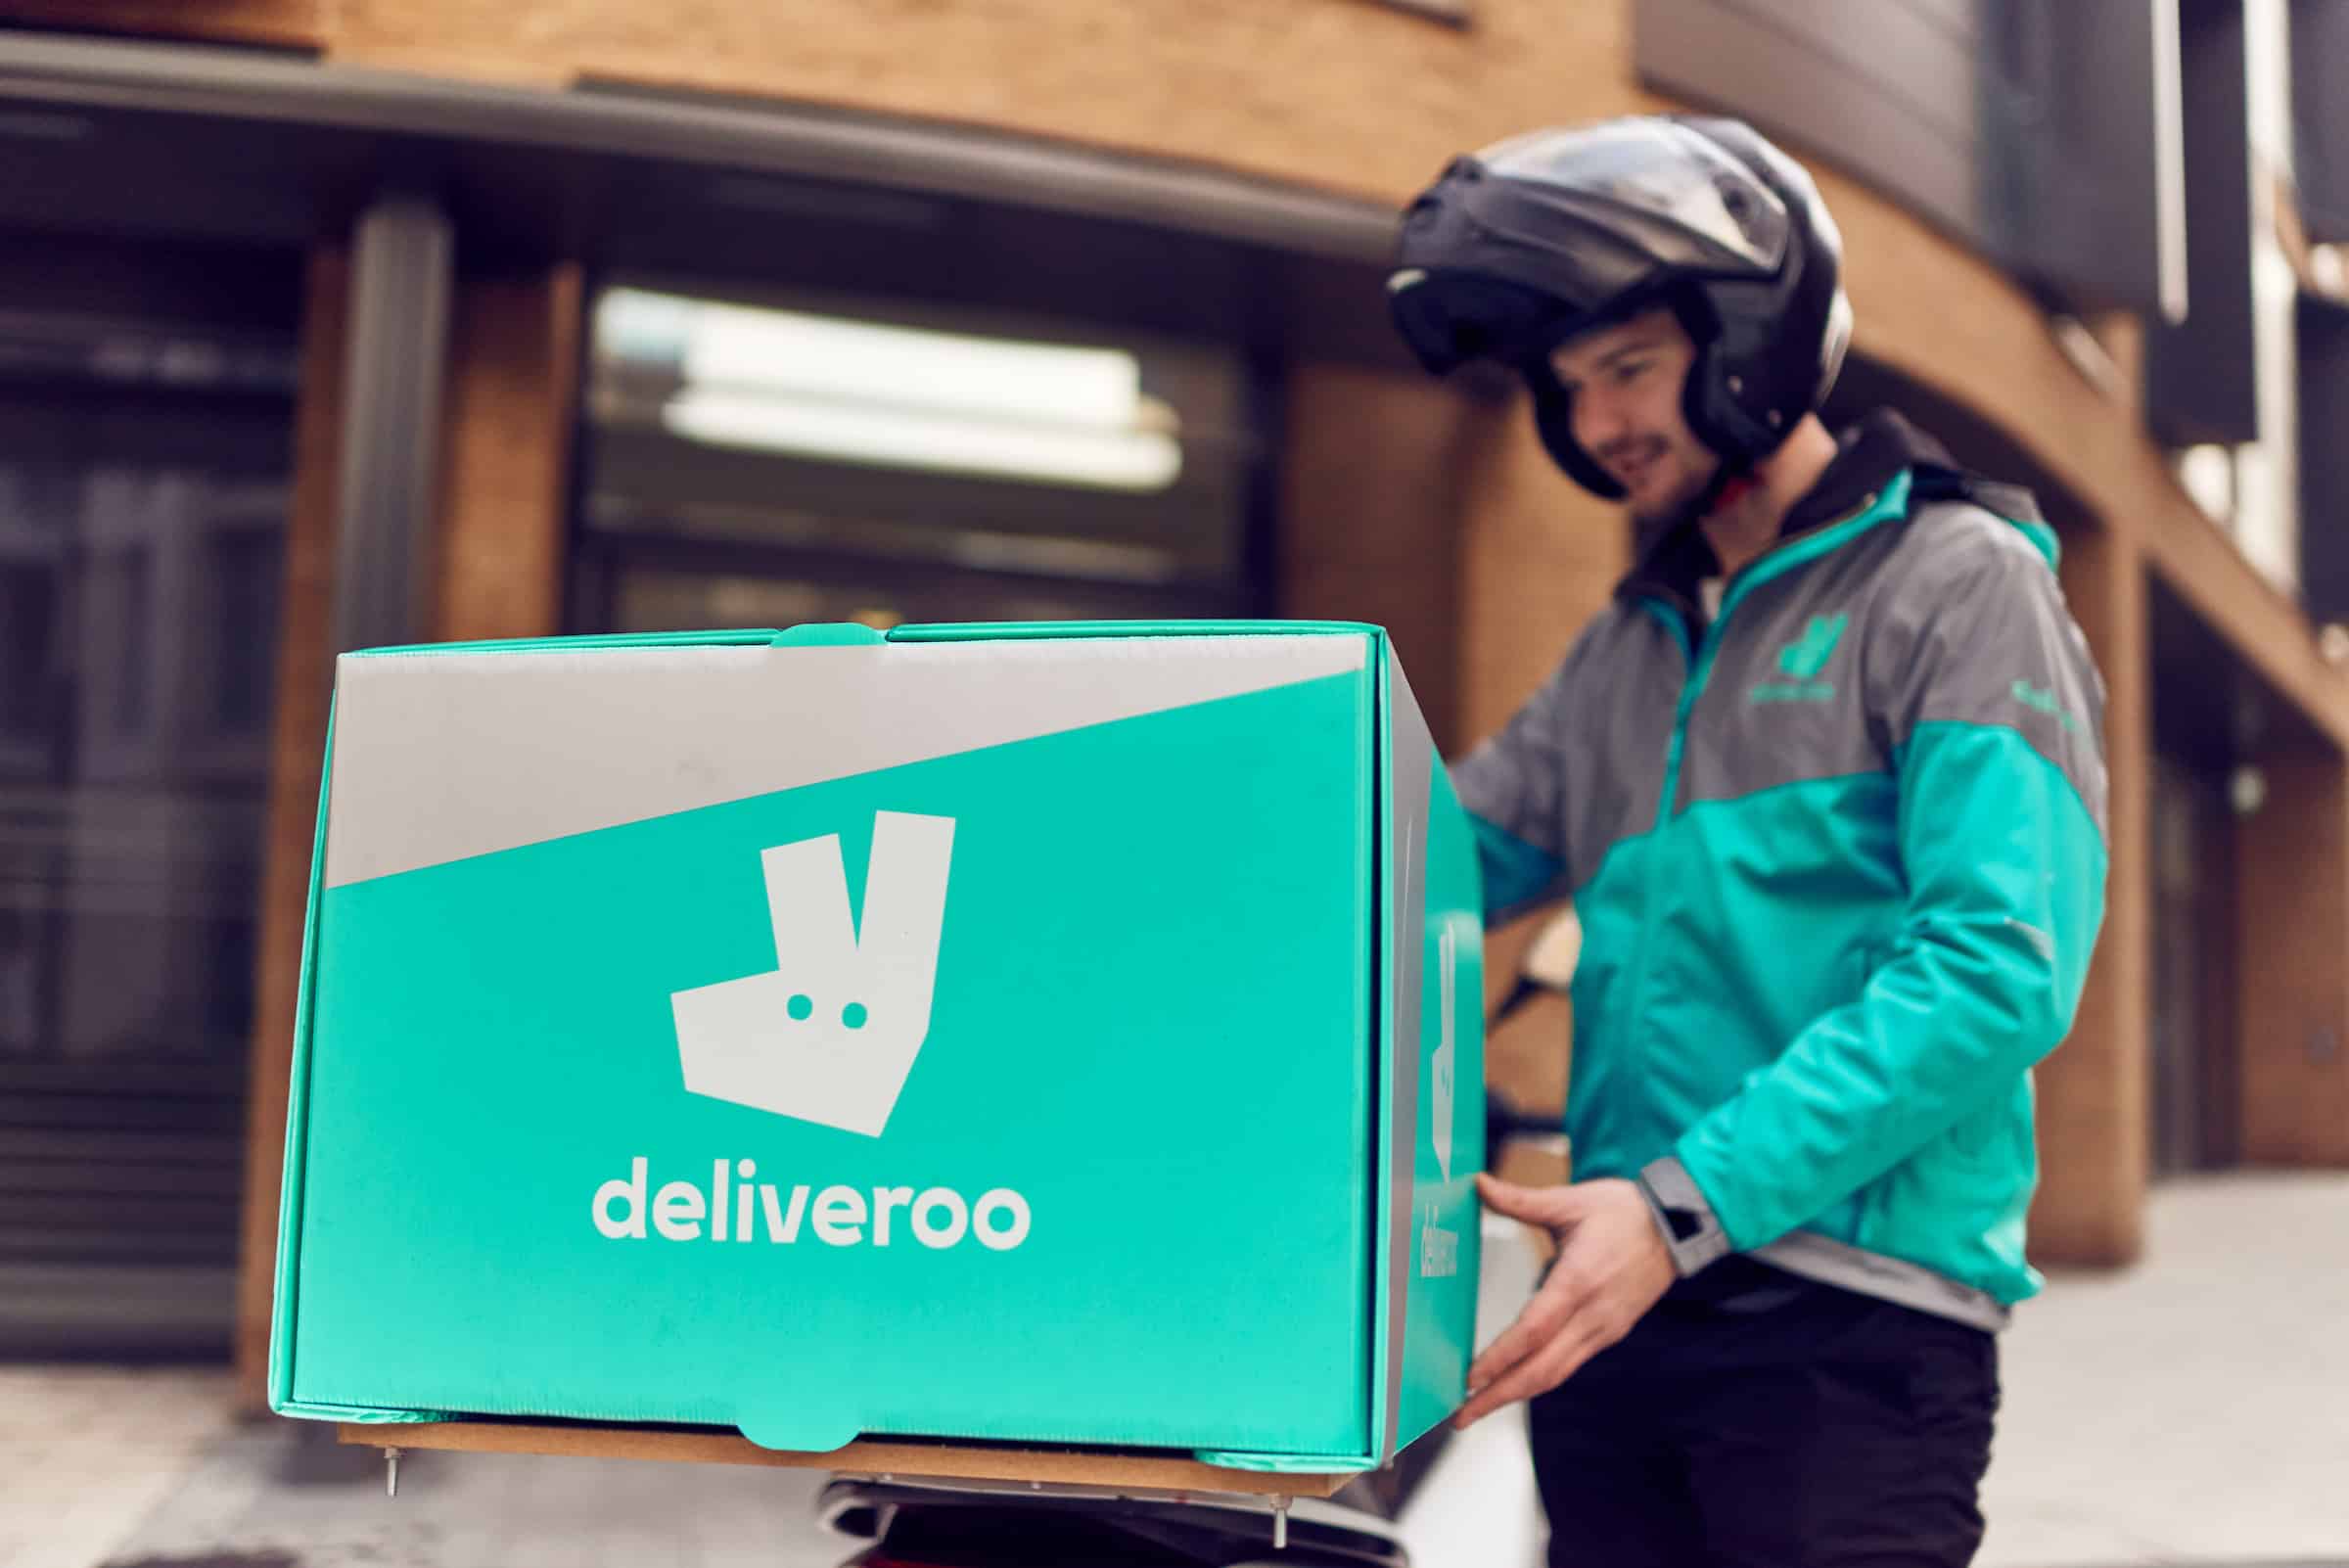 Deliveroo to provide 500,000 free meals to NHS staff